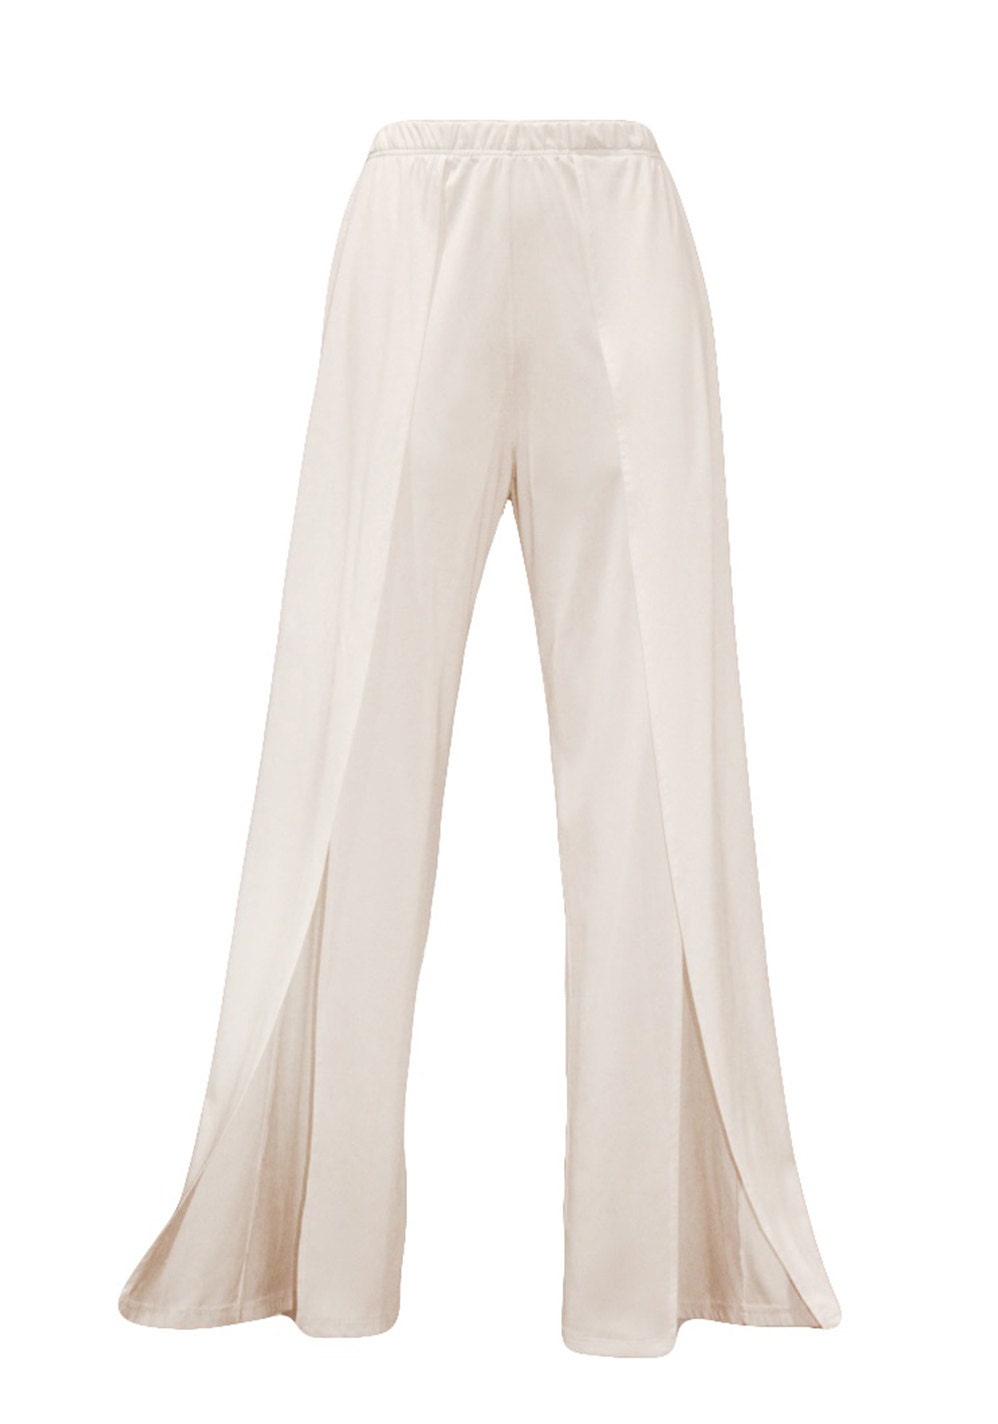 Sisi Cream High-waisted Thigh-high Double Slit Pants - Etsy